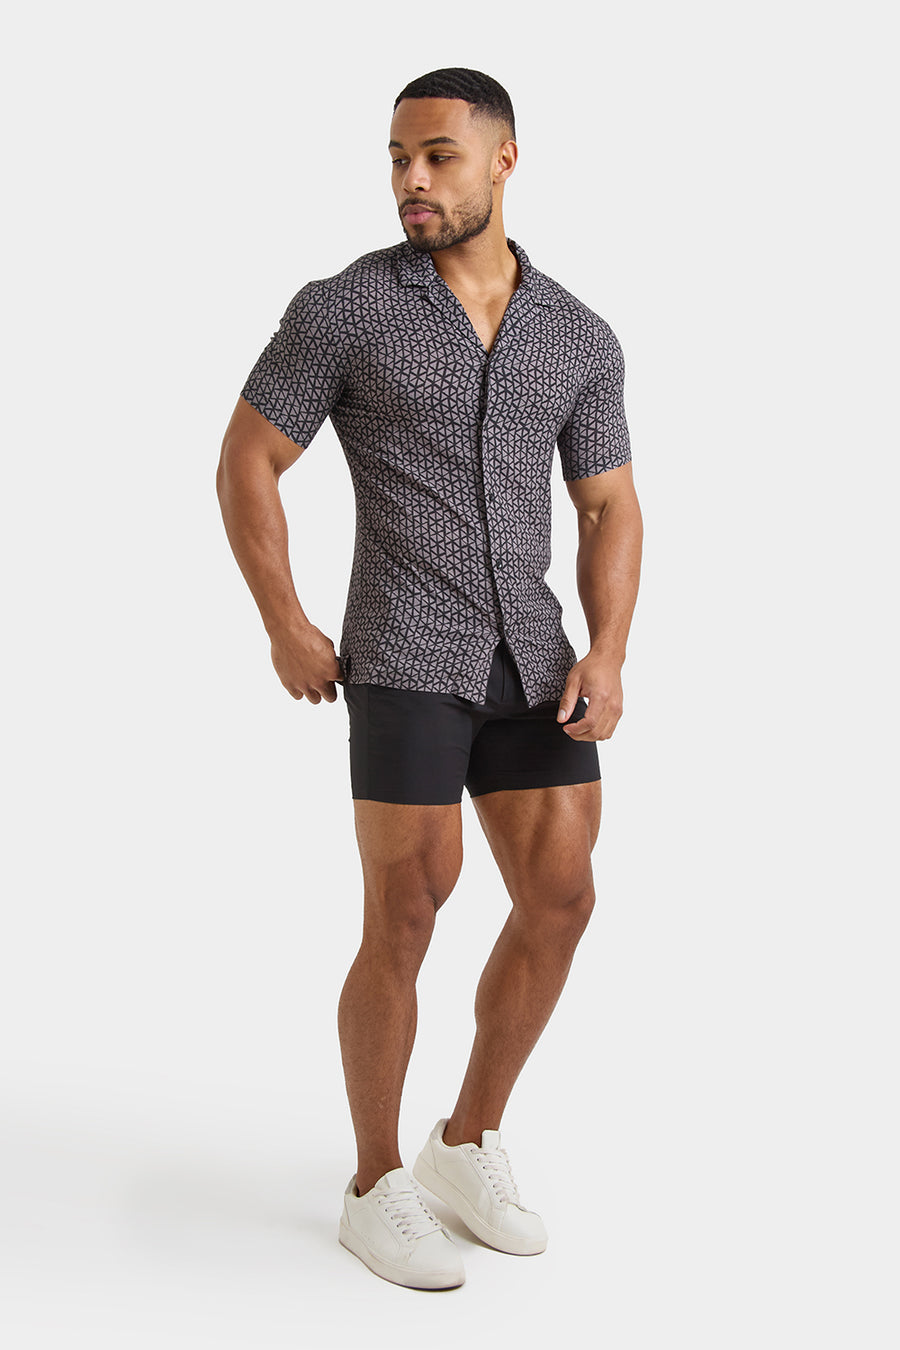 Printed Shirt in Black/Grey Doodle Geo - TAILORED ATHLETE - USA